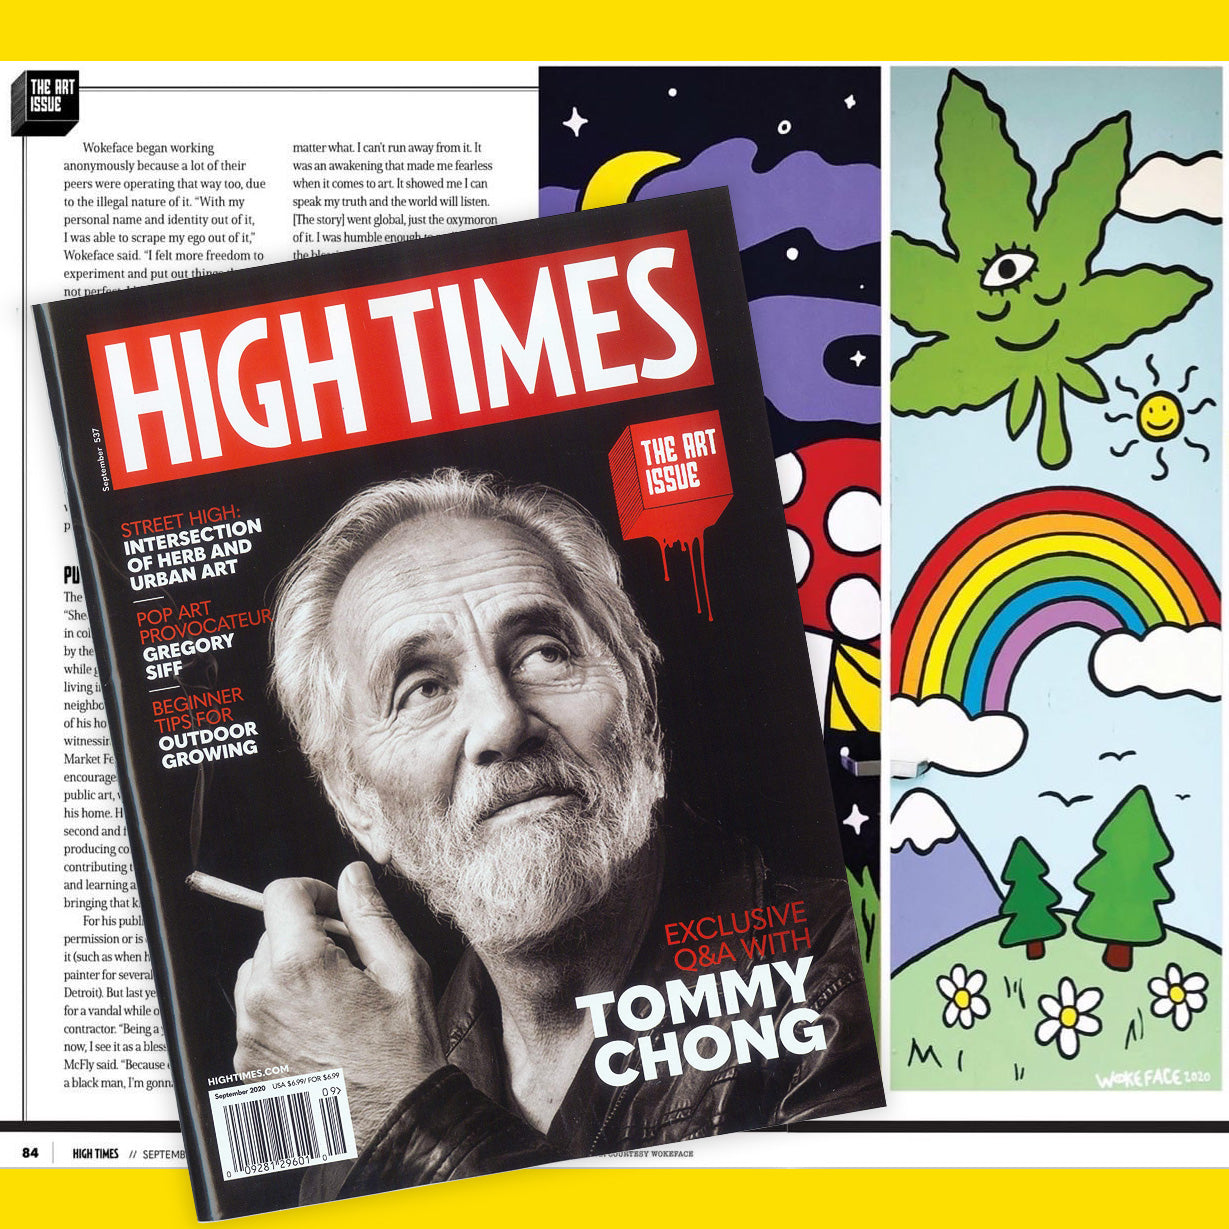 Wokeface Featured in High Times Magazine